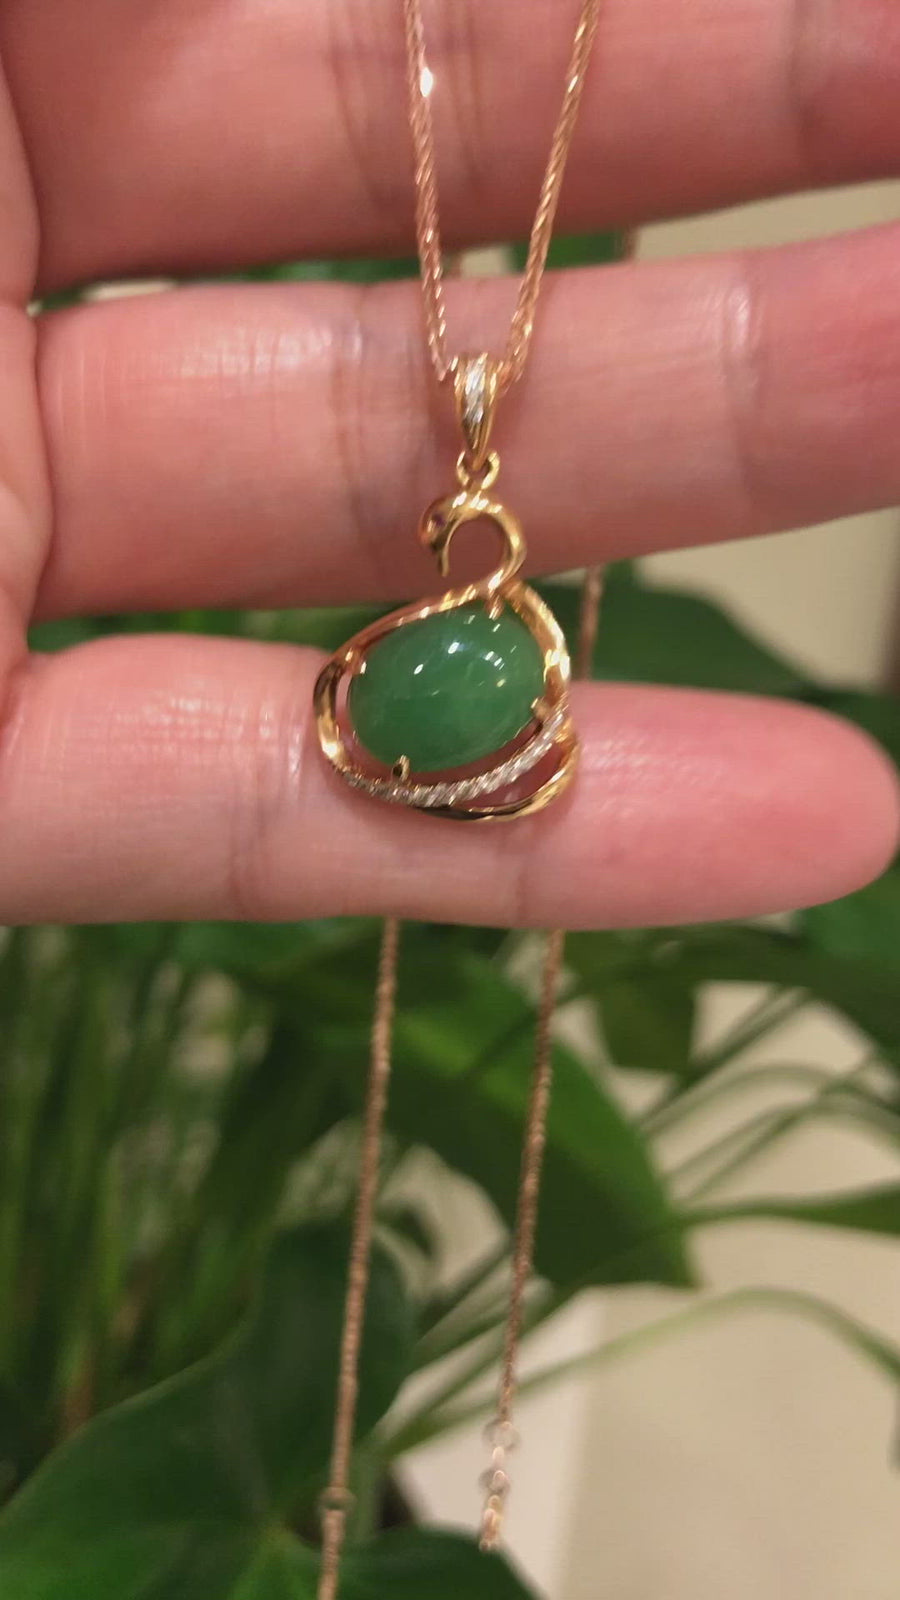 18K Rose Gold "Swan" Imperial Jadeite Jade Cabochon Necklace with Diamonds